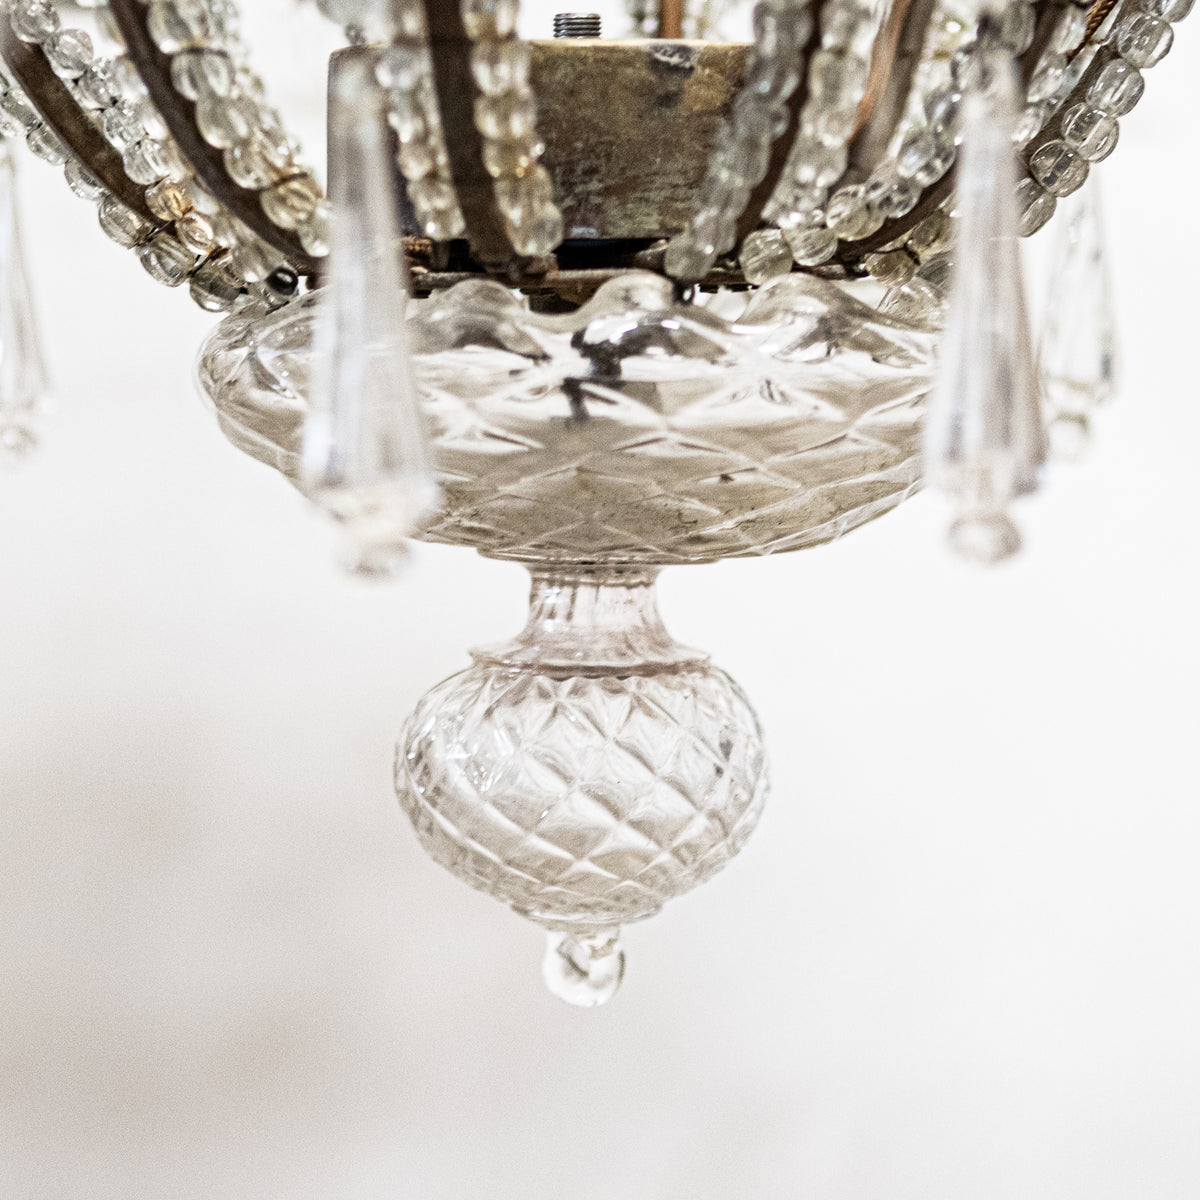 Large Reclaimed Beaded Crystal Murano Glass Chandelier | The Architectural Forum